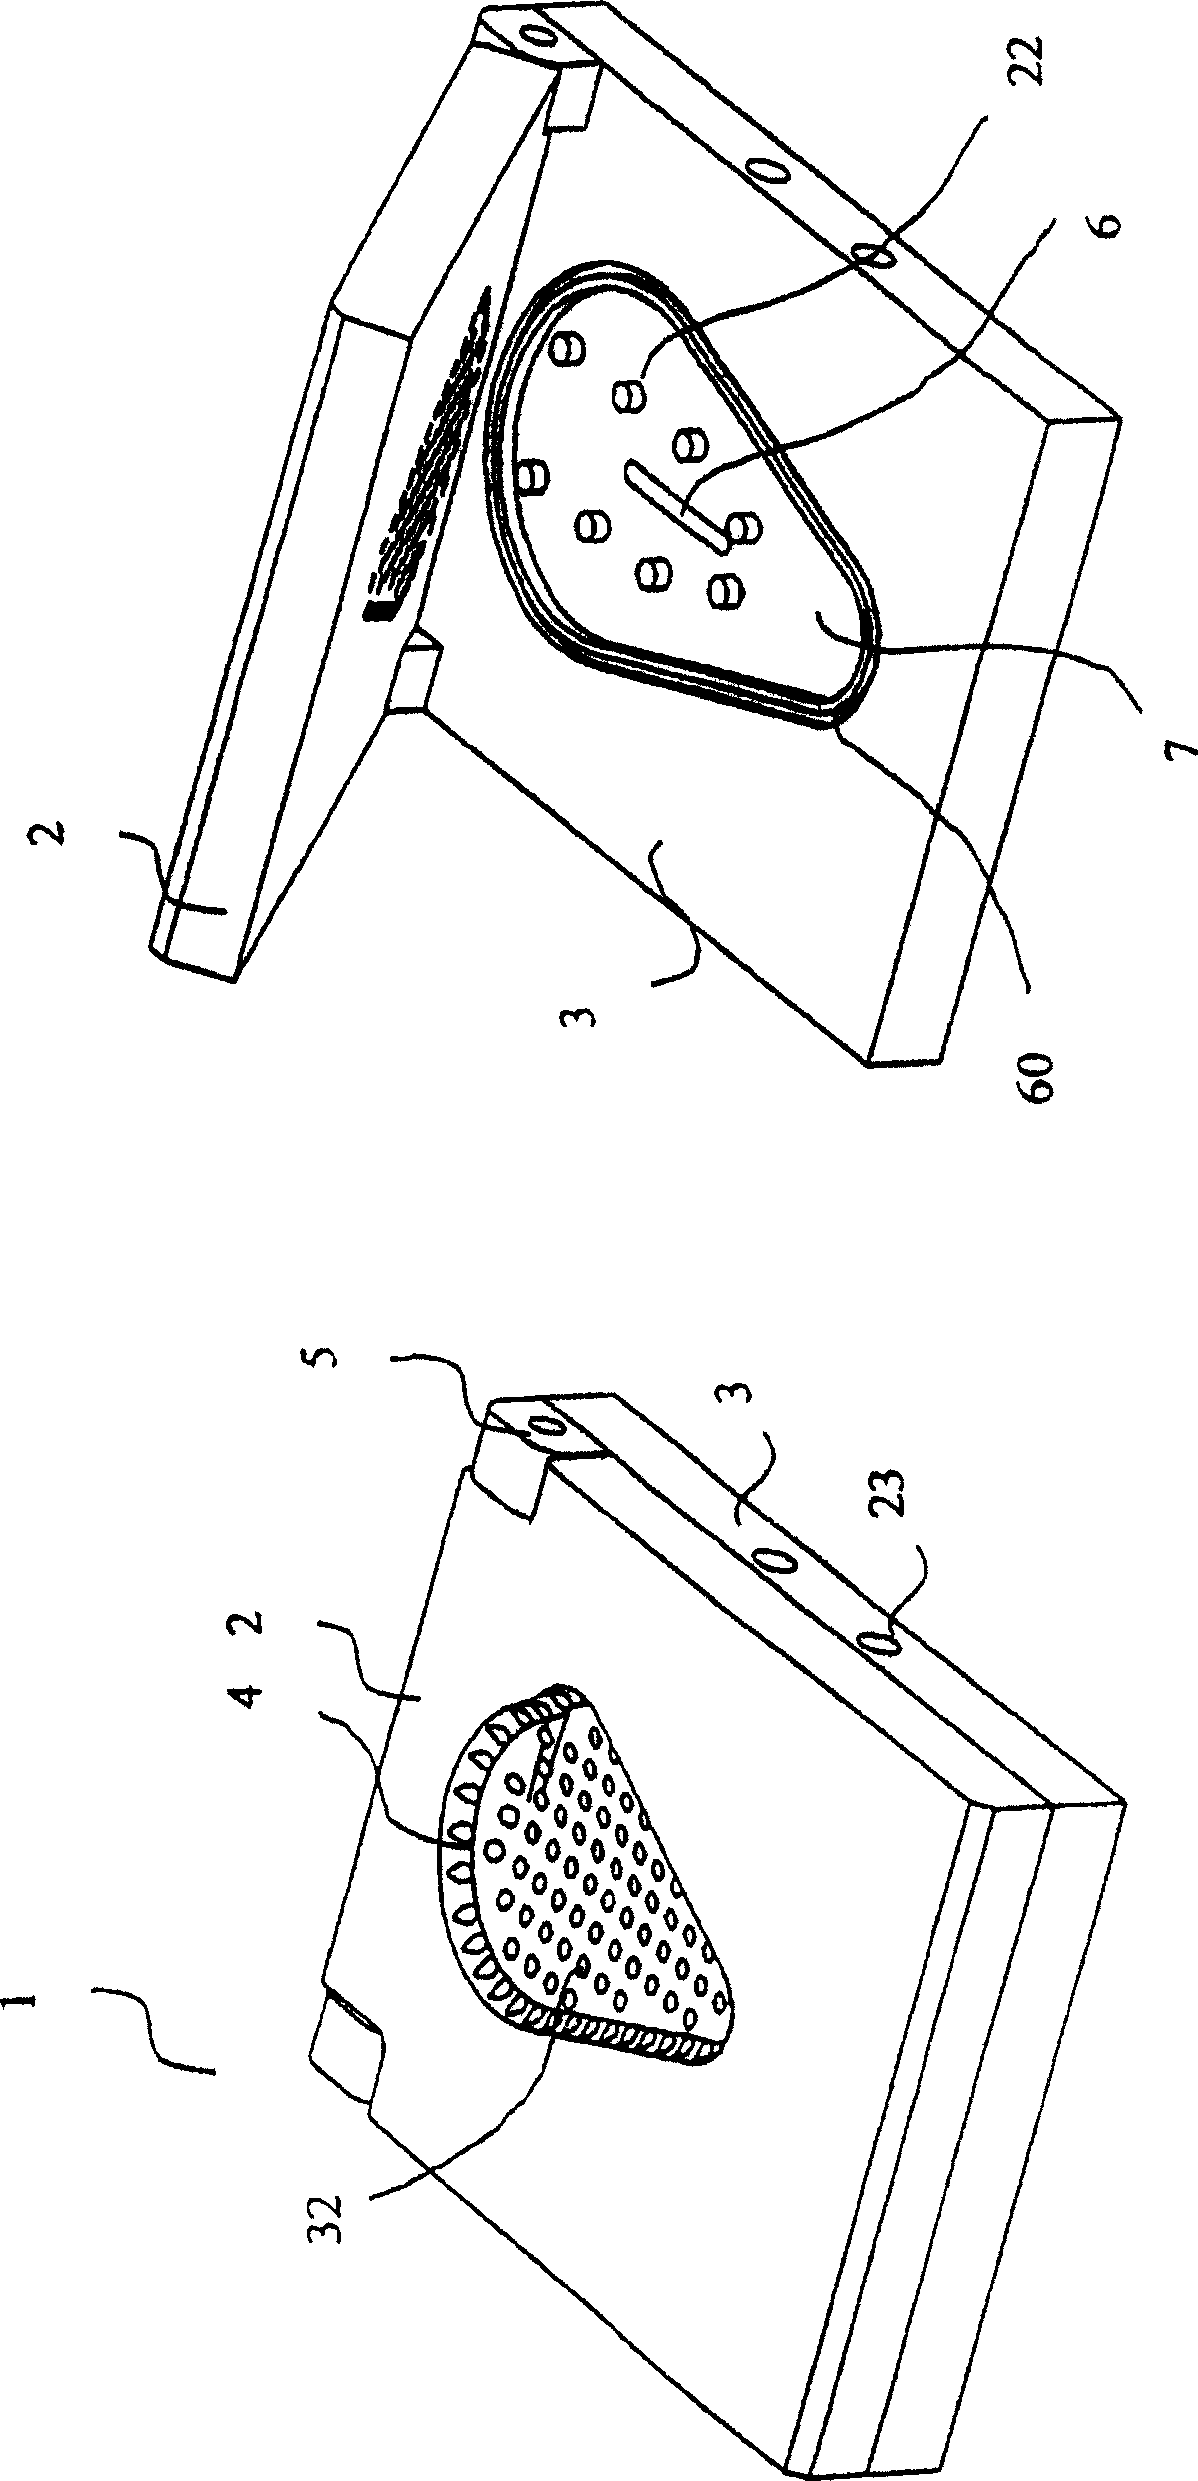 A method and device for cutting objects into fixed portions